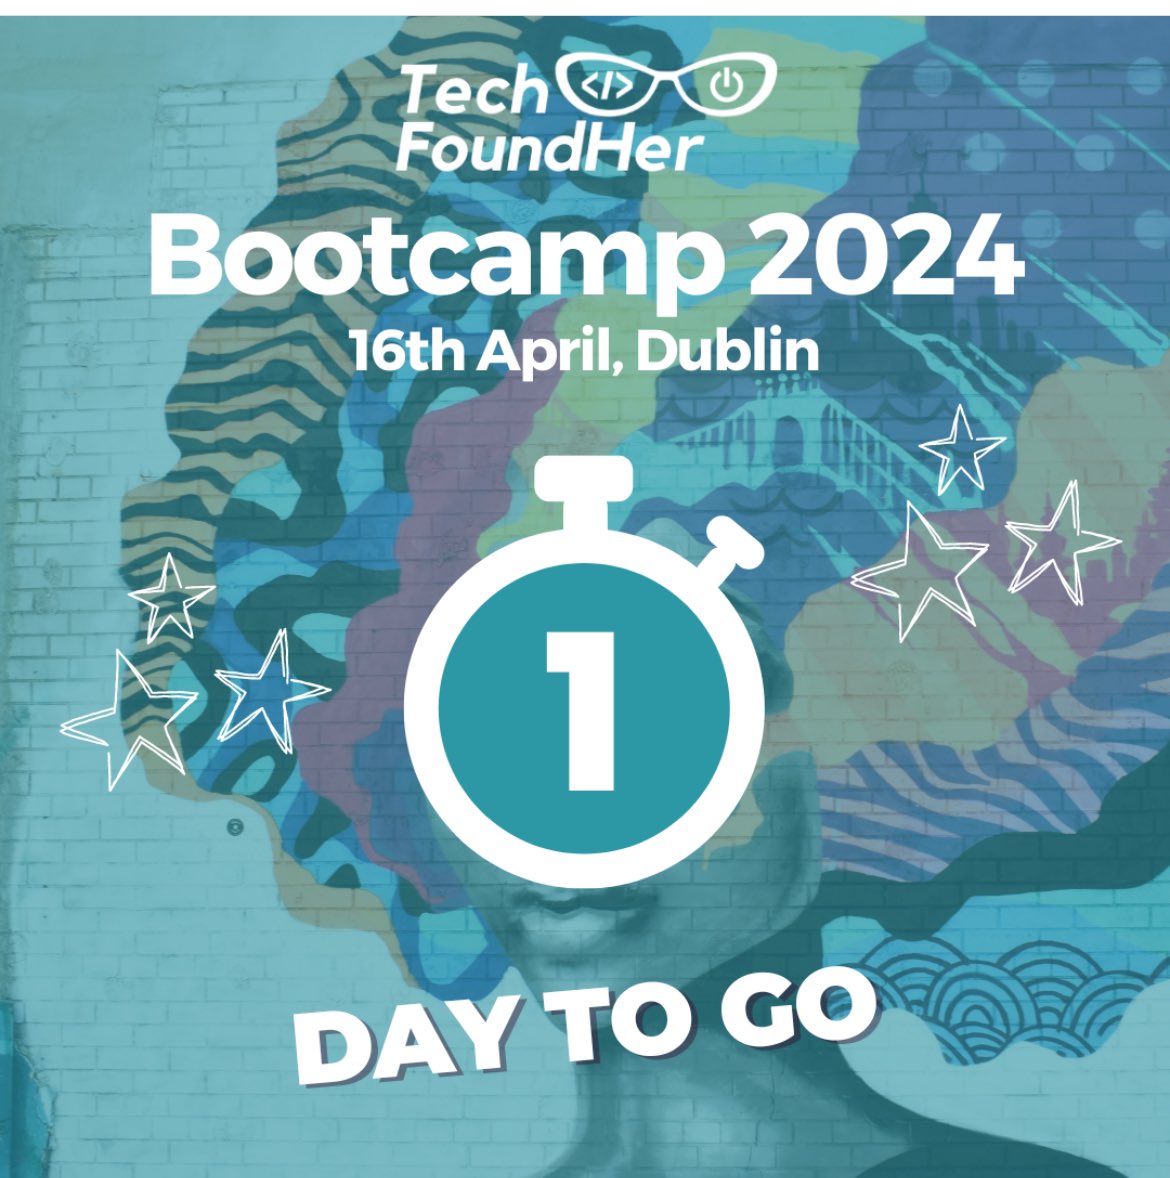 It’s nearly time 💫💫💫💫  @Entirl @KPMG_Ireland @WITSIreland @DCUInvent @Scanpiea @AwakenHub @womenintech .
Let’s level up this playing field ⚡️⚡️⚡️
#techfoundher24 #innovation #techtribe